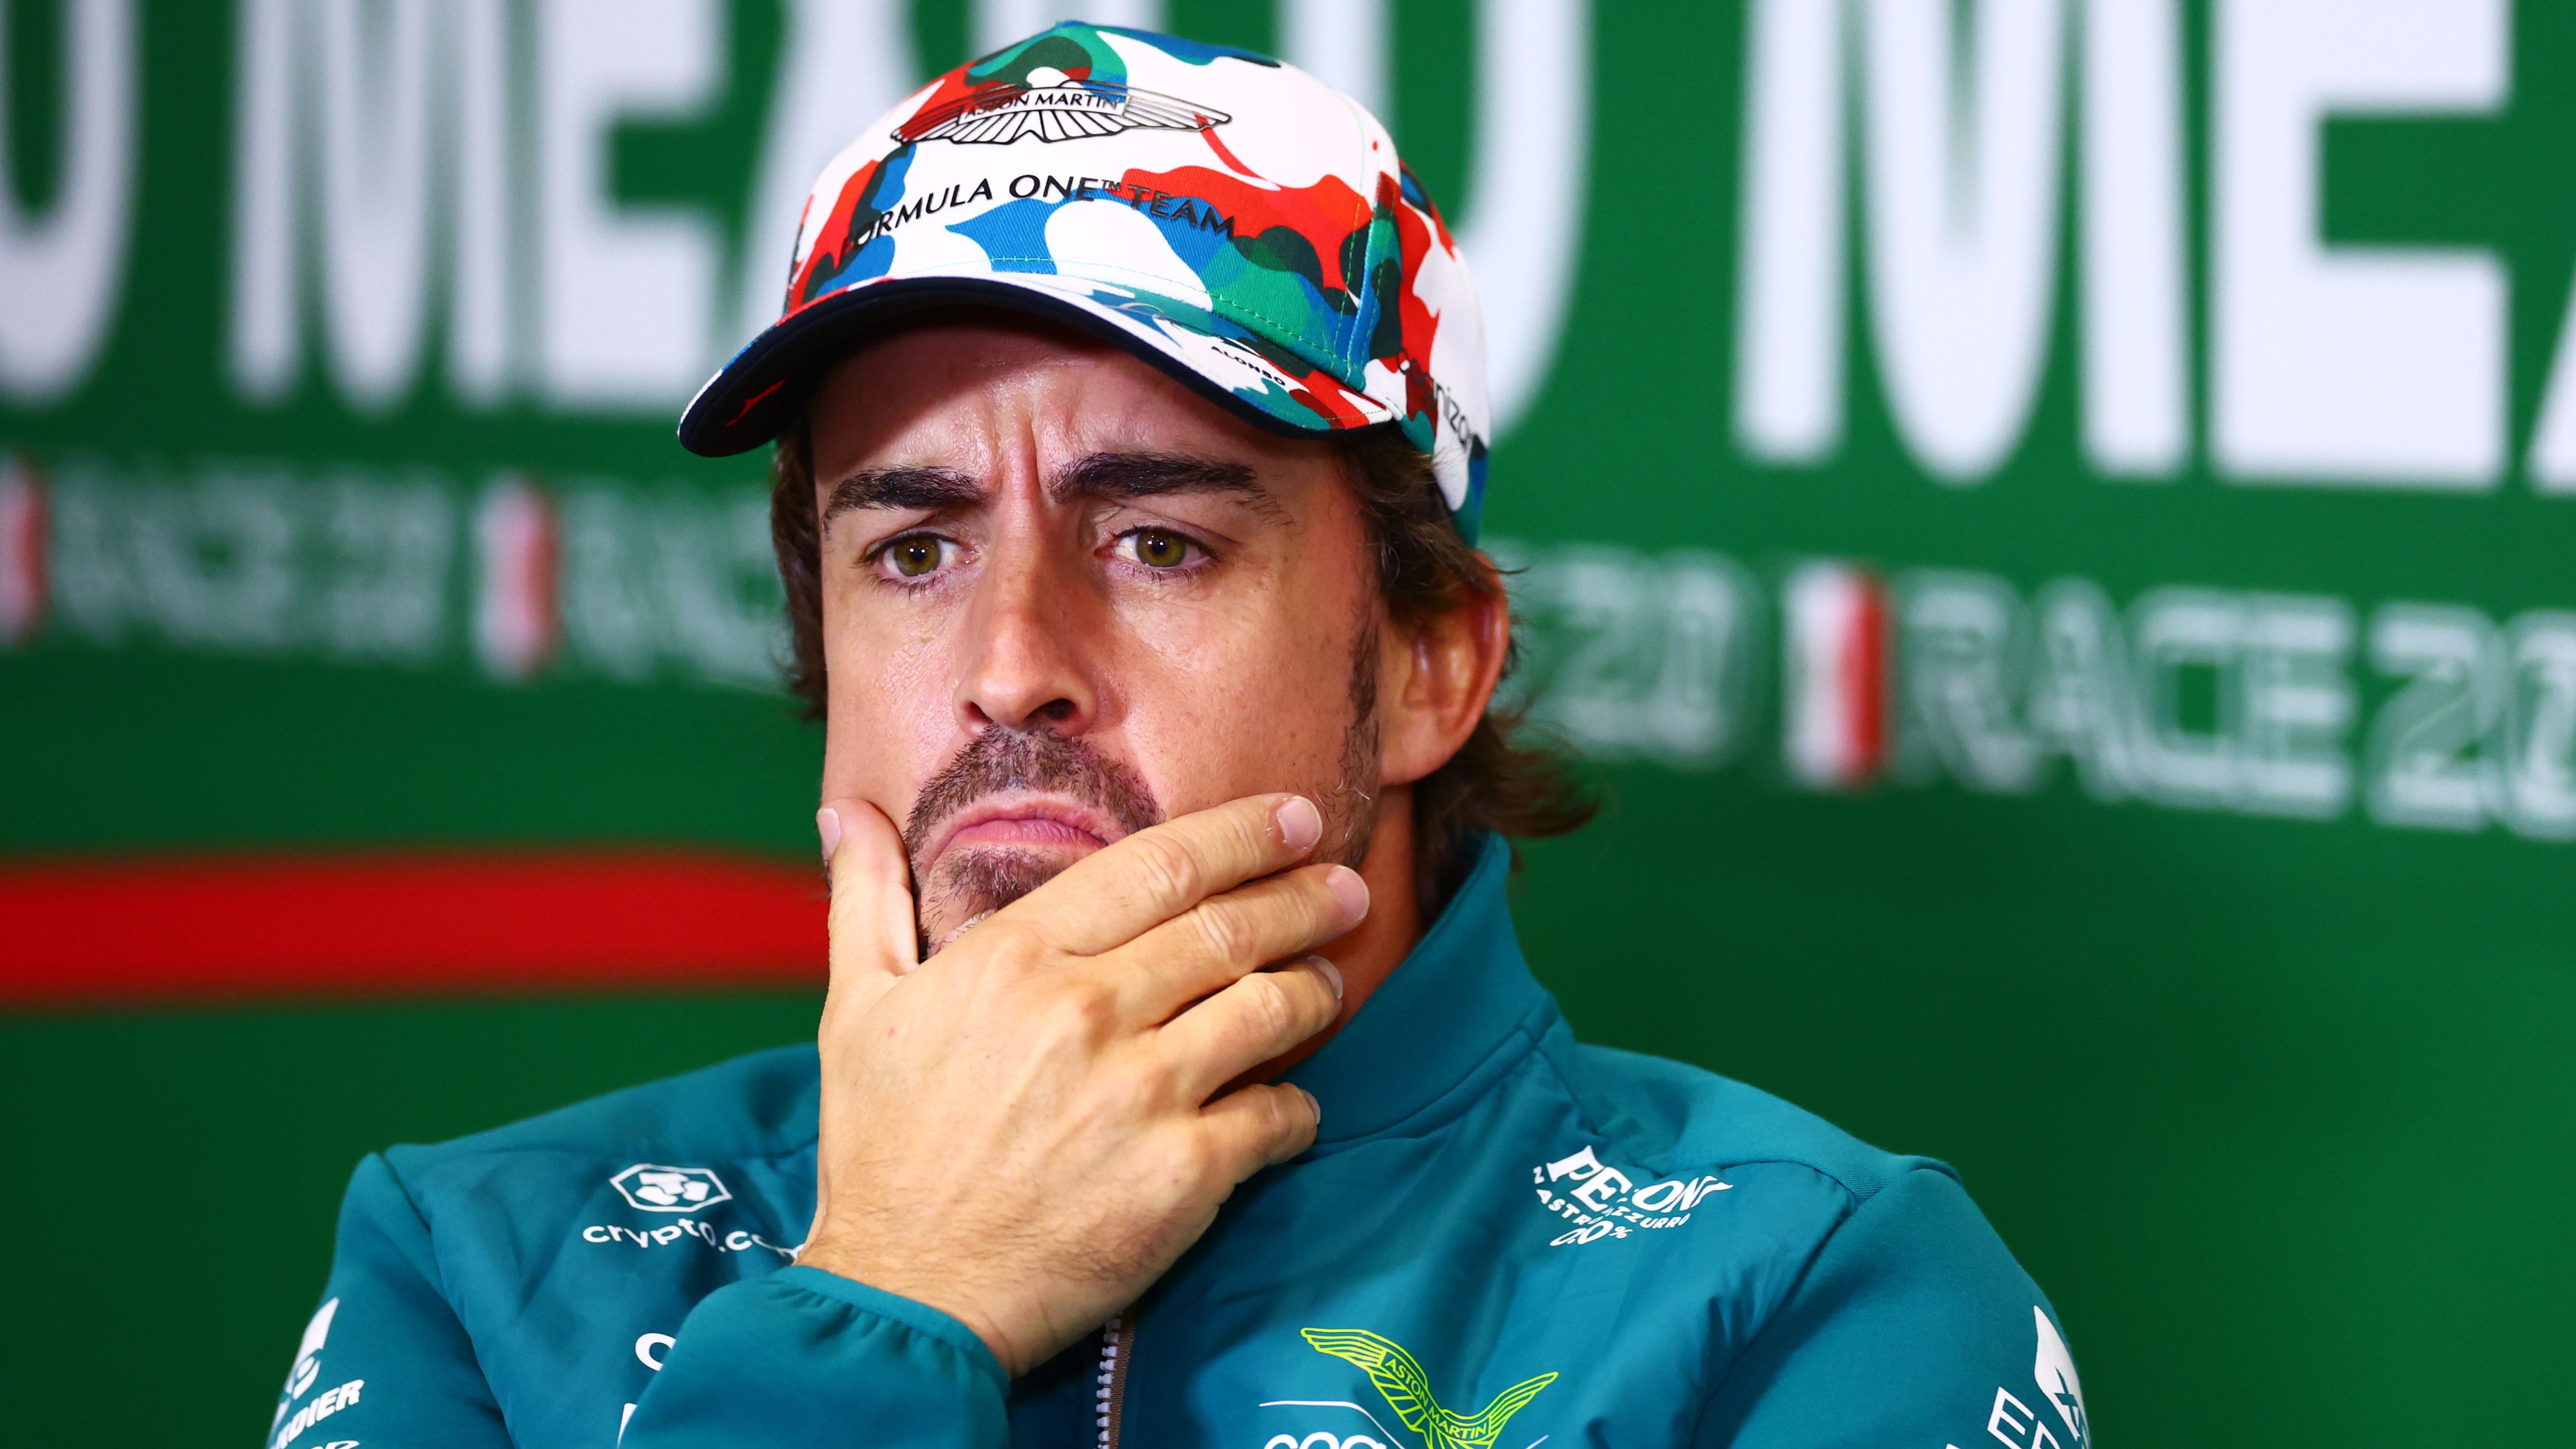 Fernando Alonso at a drivers press conference.